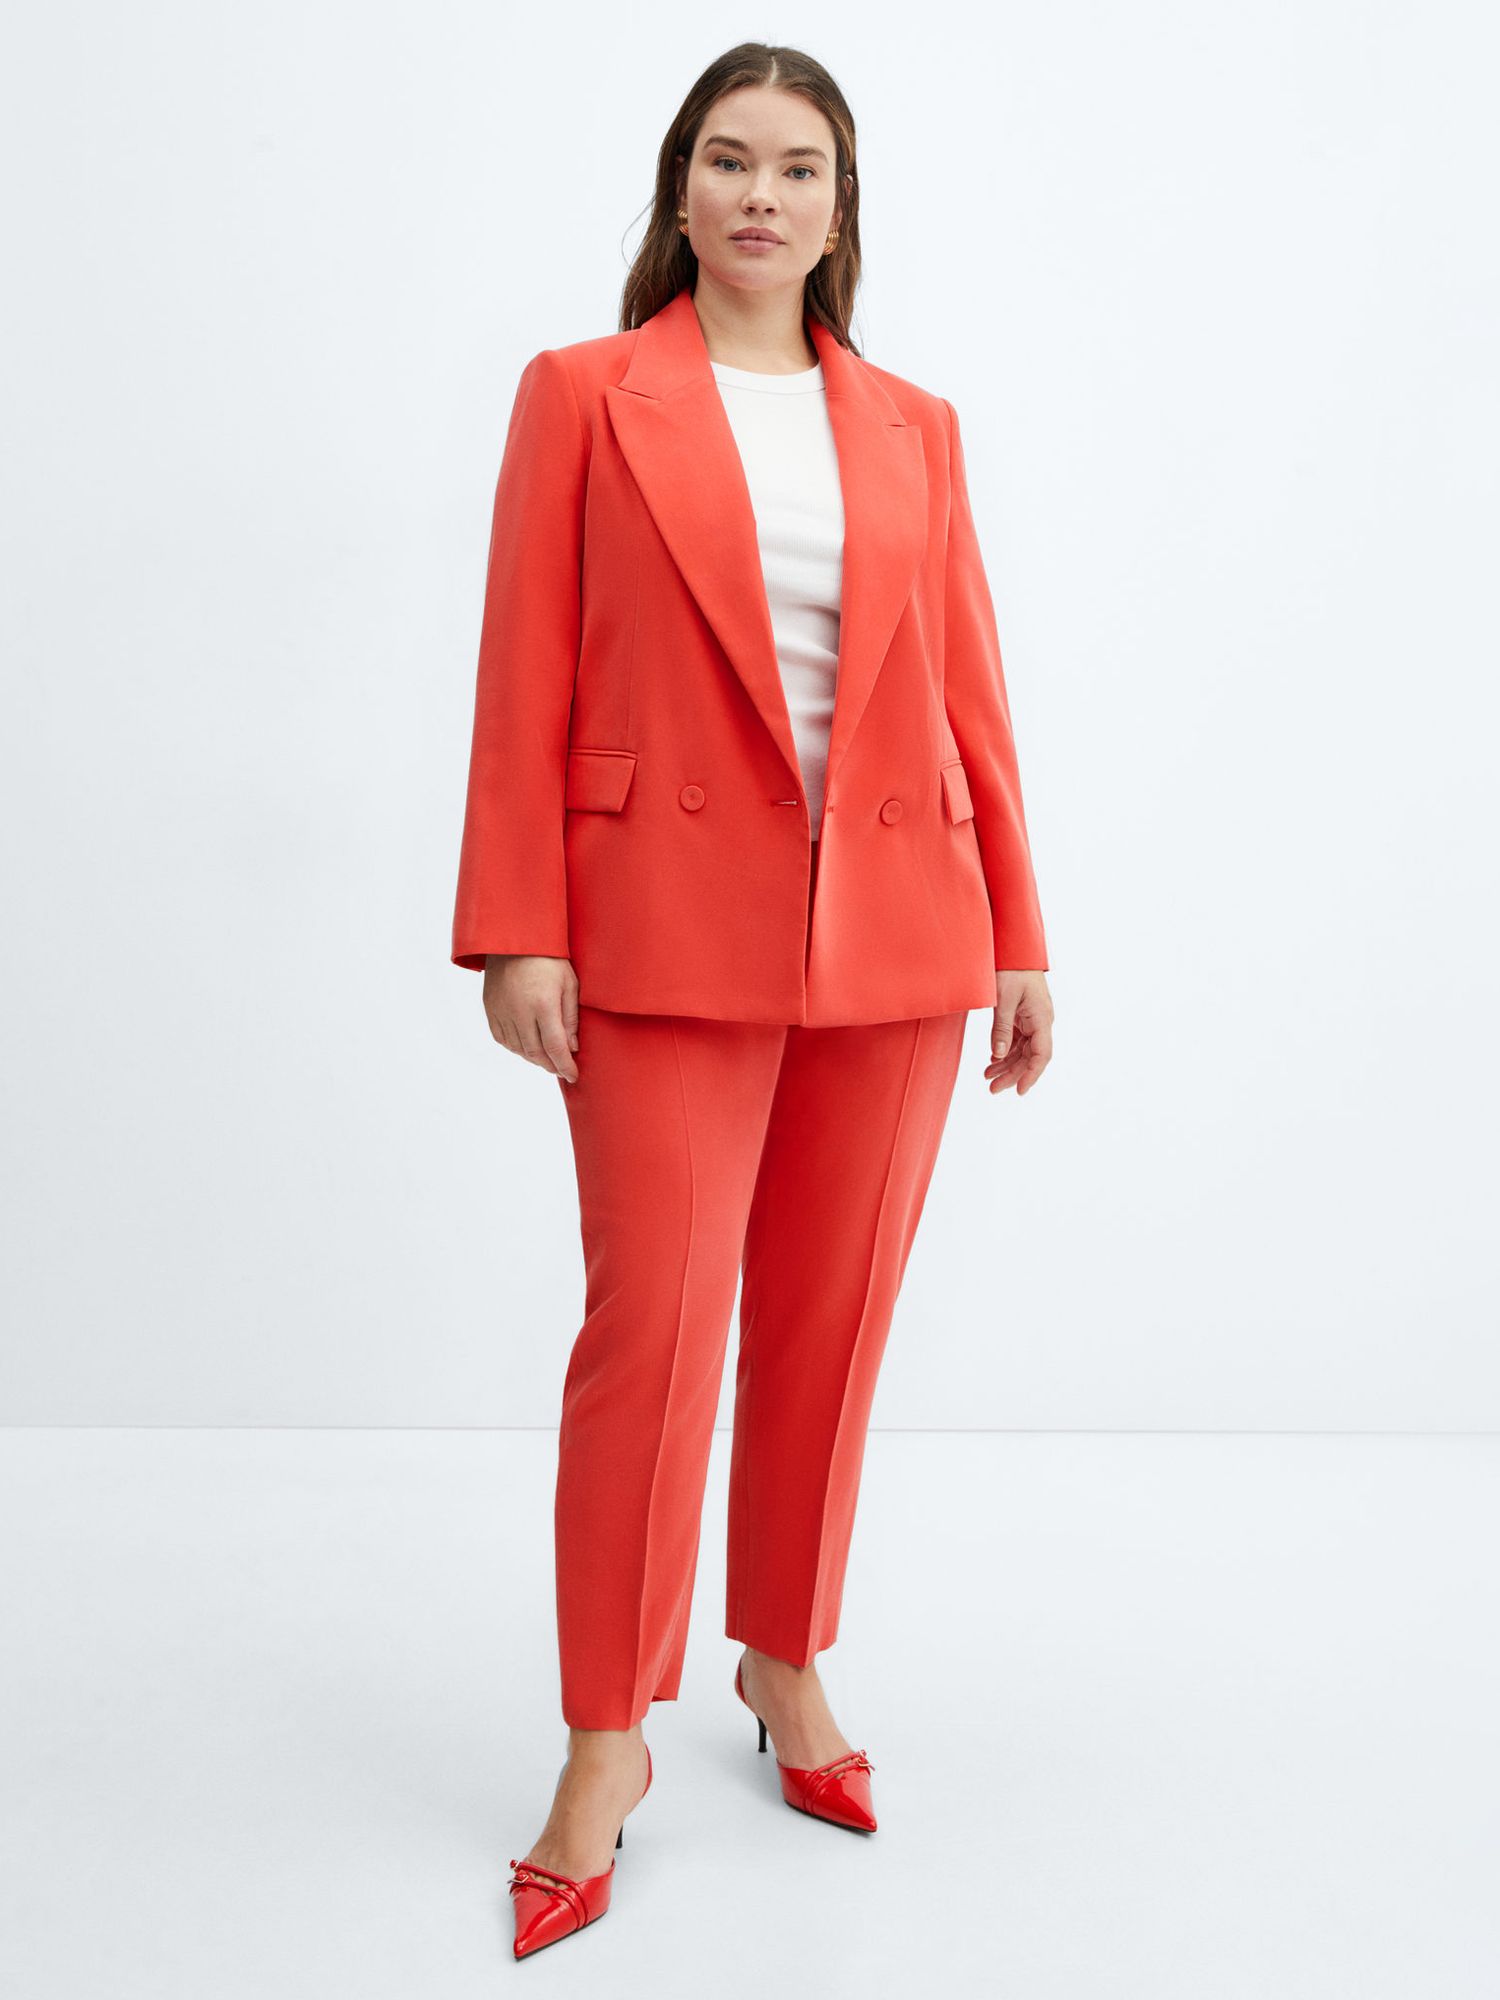 Buy Mango Tempo Straight Suit Trousers Online at johnlewis.com